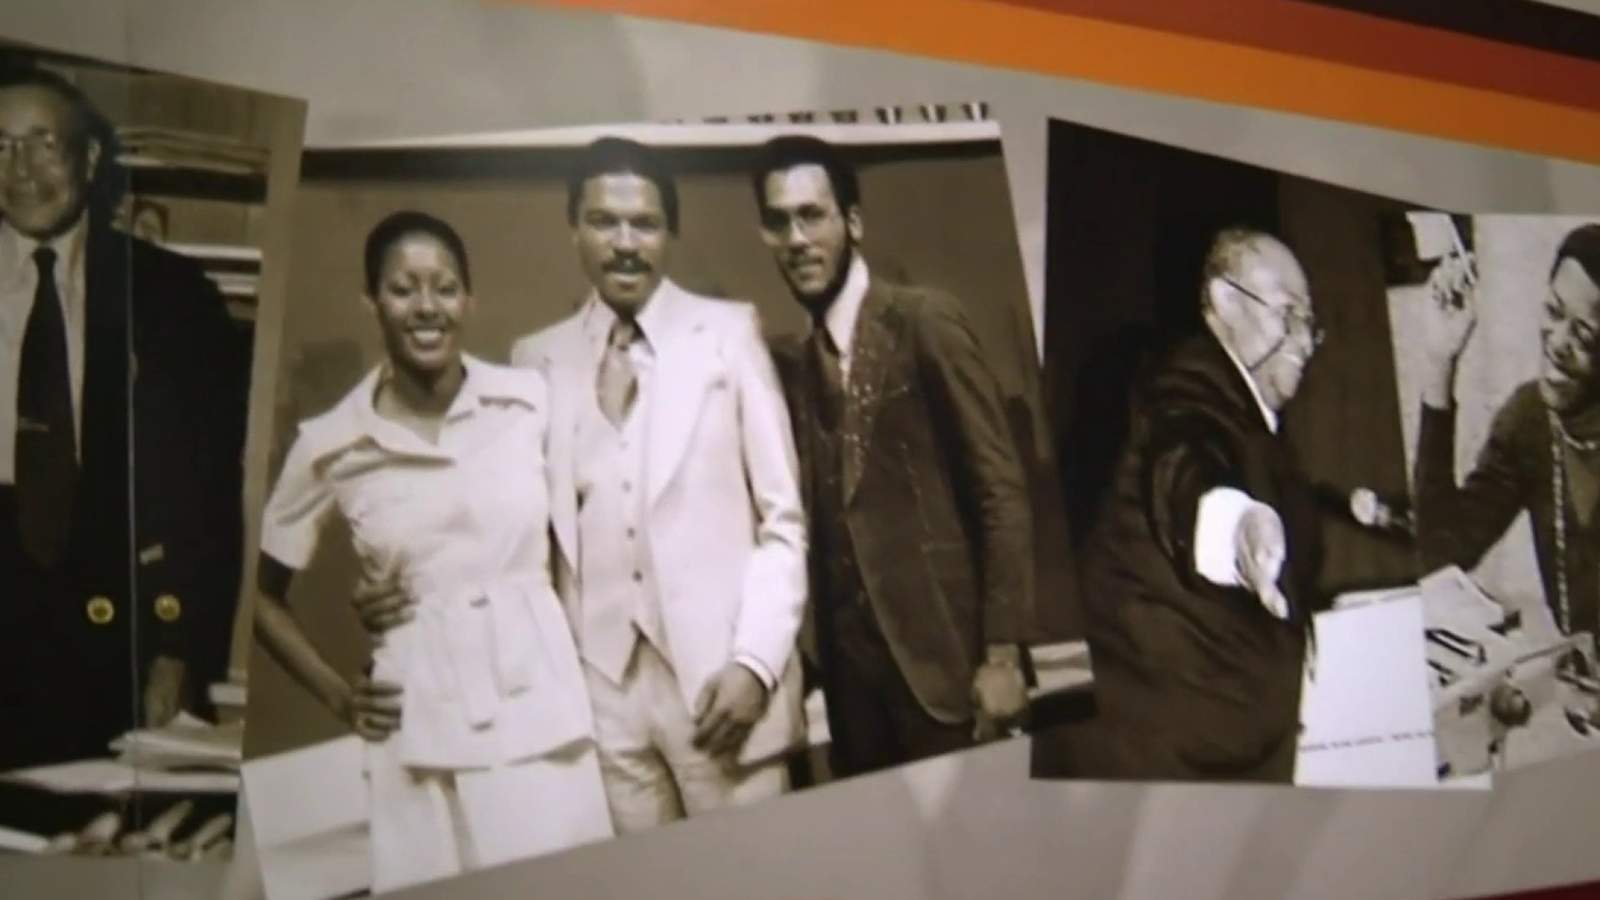 Detroit’s historic WGPR-TV station helped amplify Black voices for decades